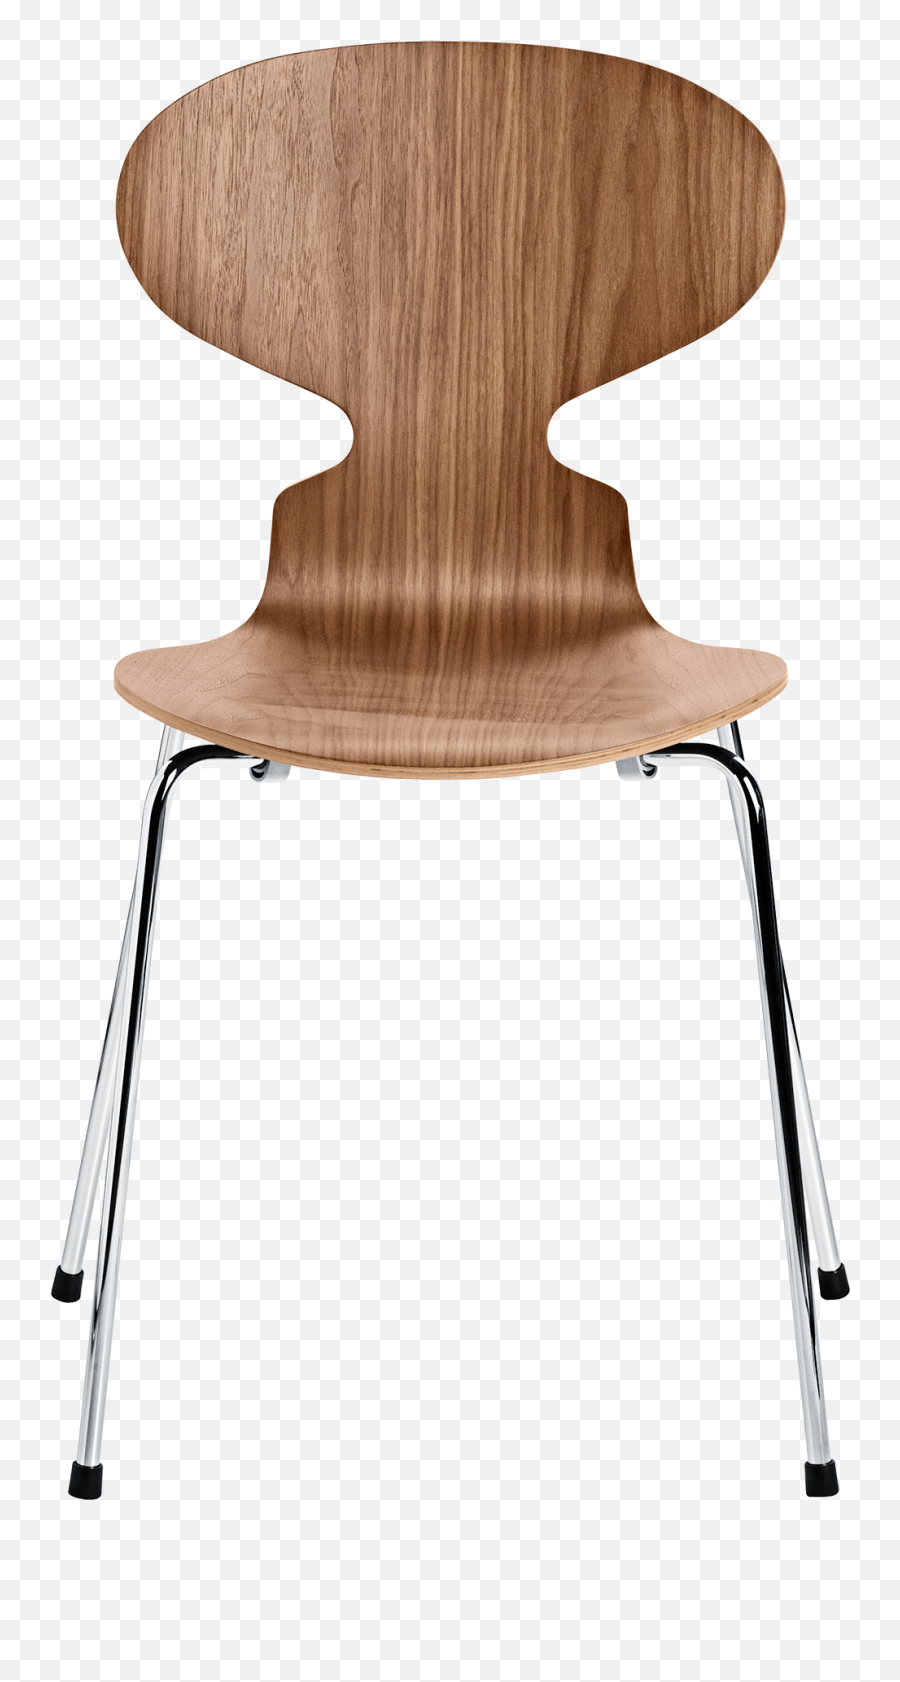 The Ant Chair Clear Lacquer - Arne Jacobsen Ant Chair Png,Walnut Transparent